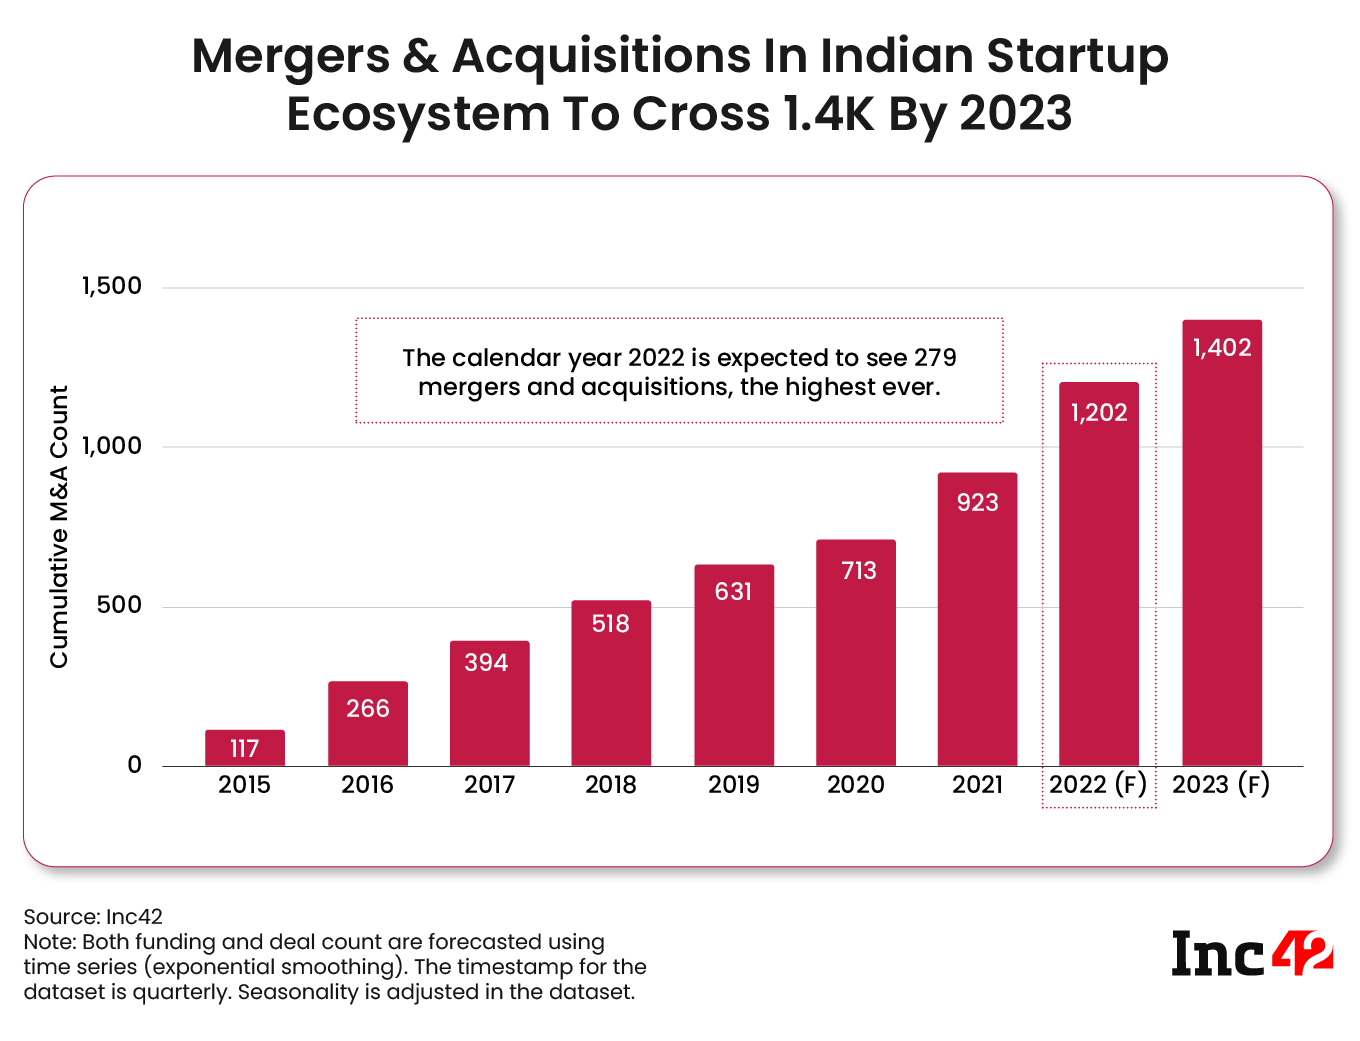 Increasing M&A deals in India's startup ecosystem